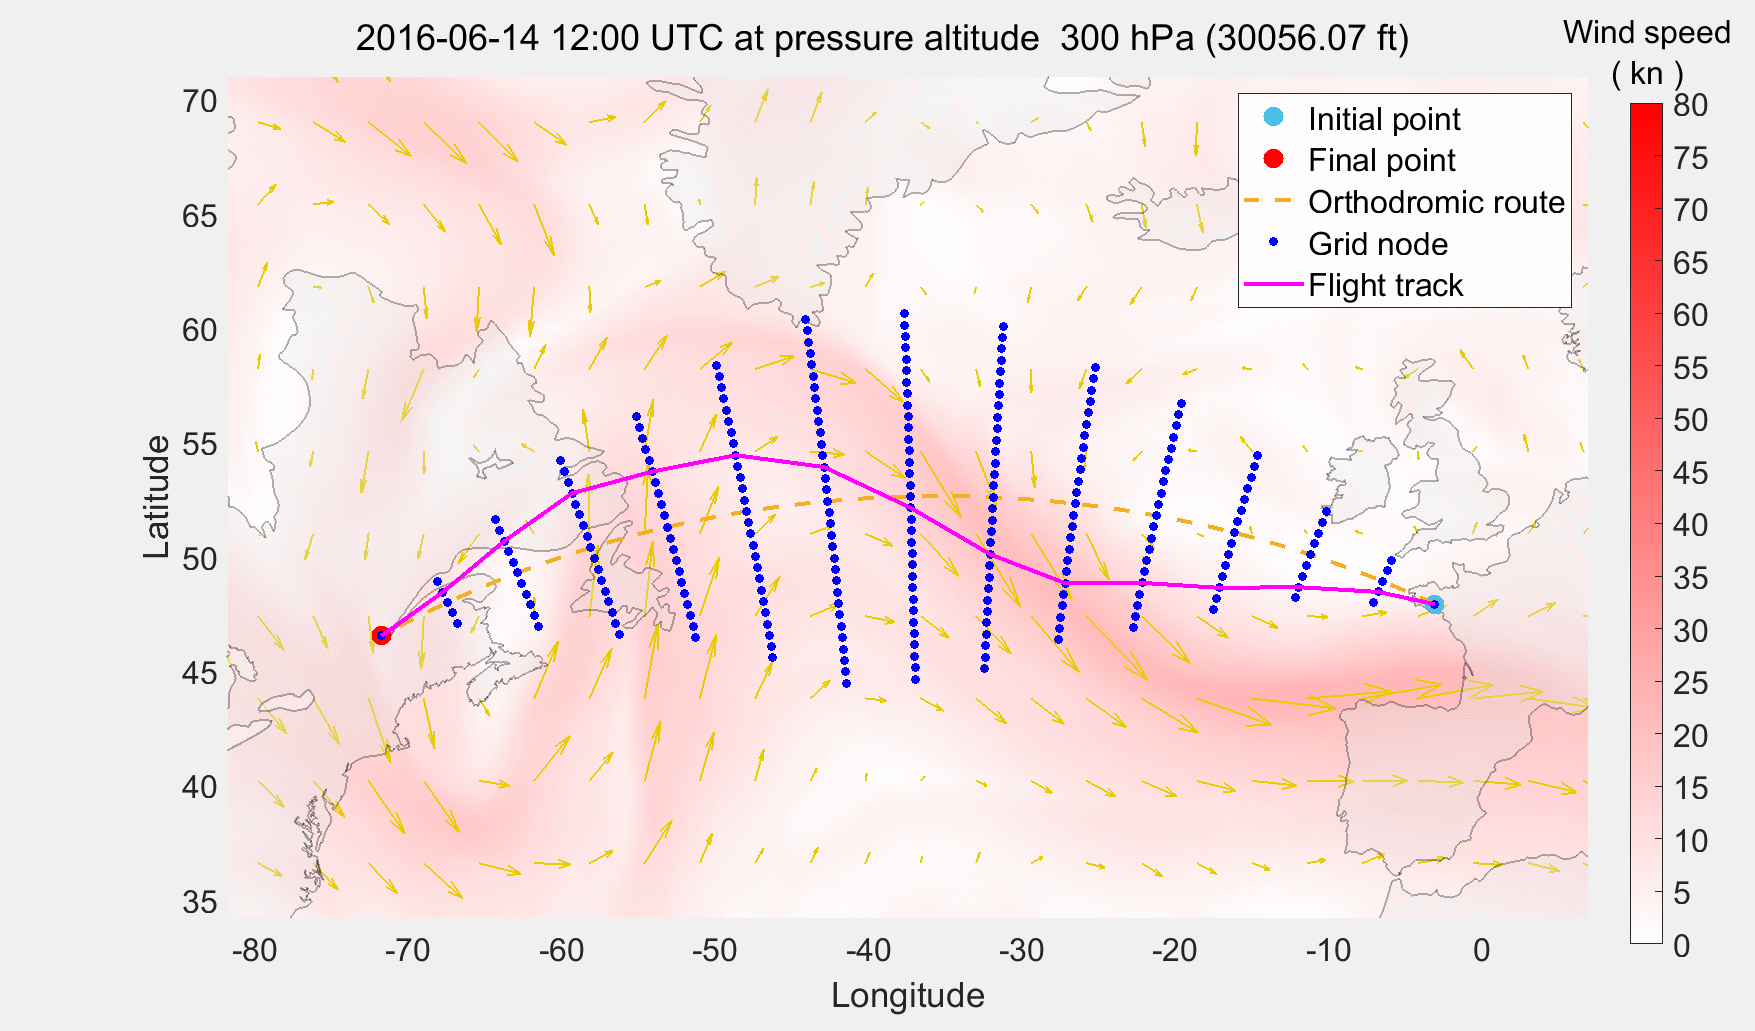 Upper-level atmospheric wind map with flight path and orthodromic route overlay.